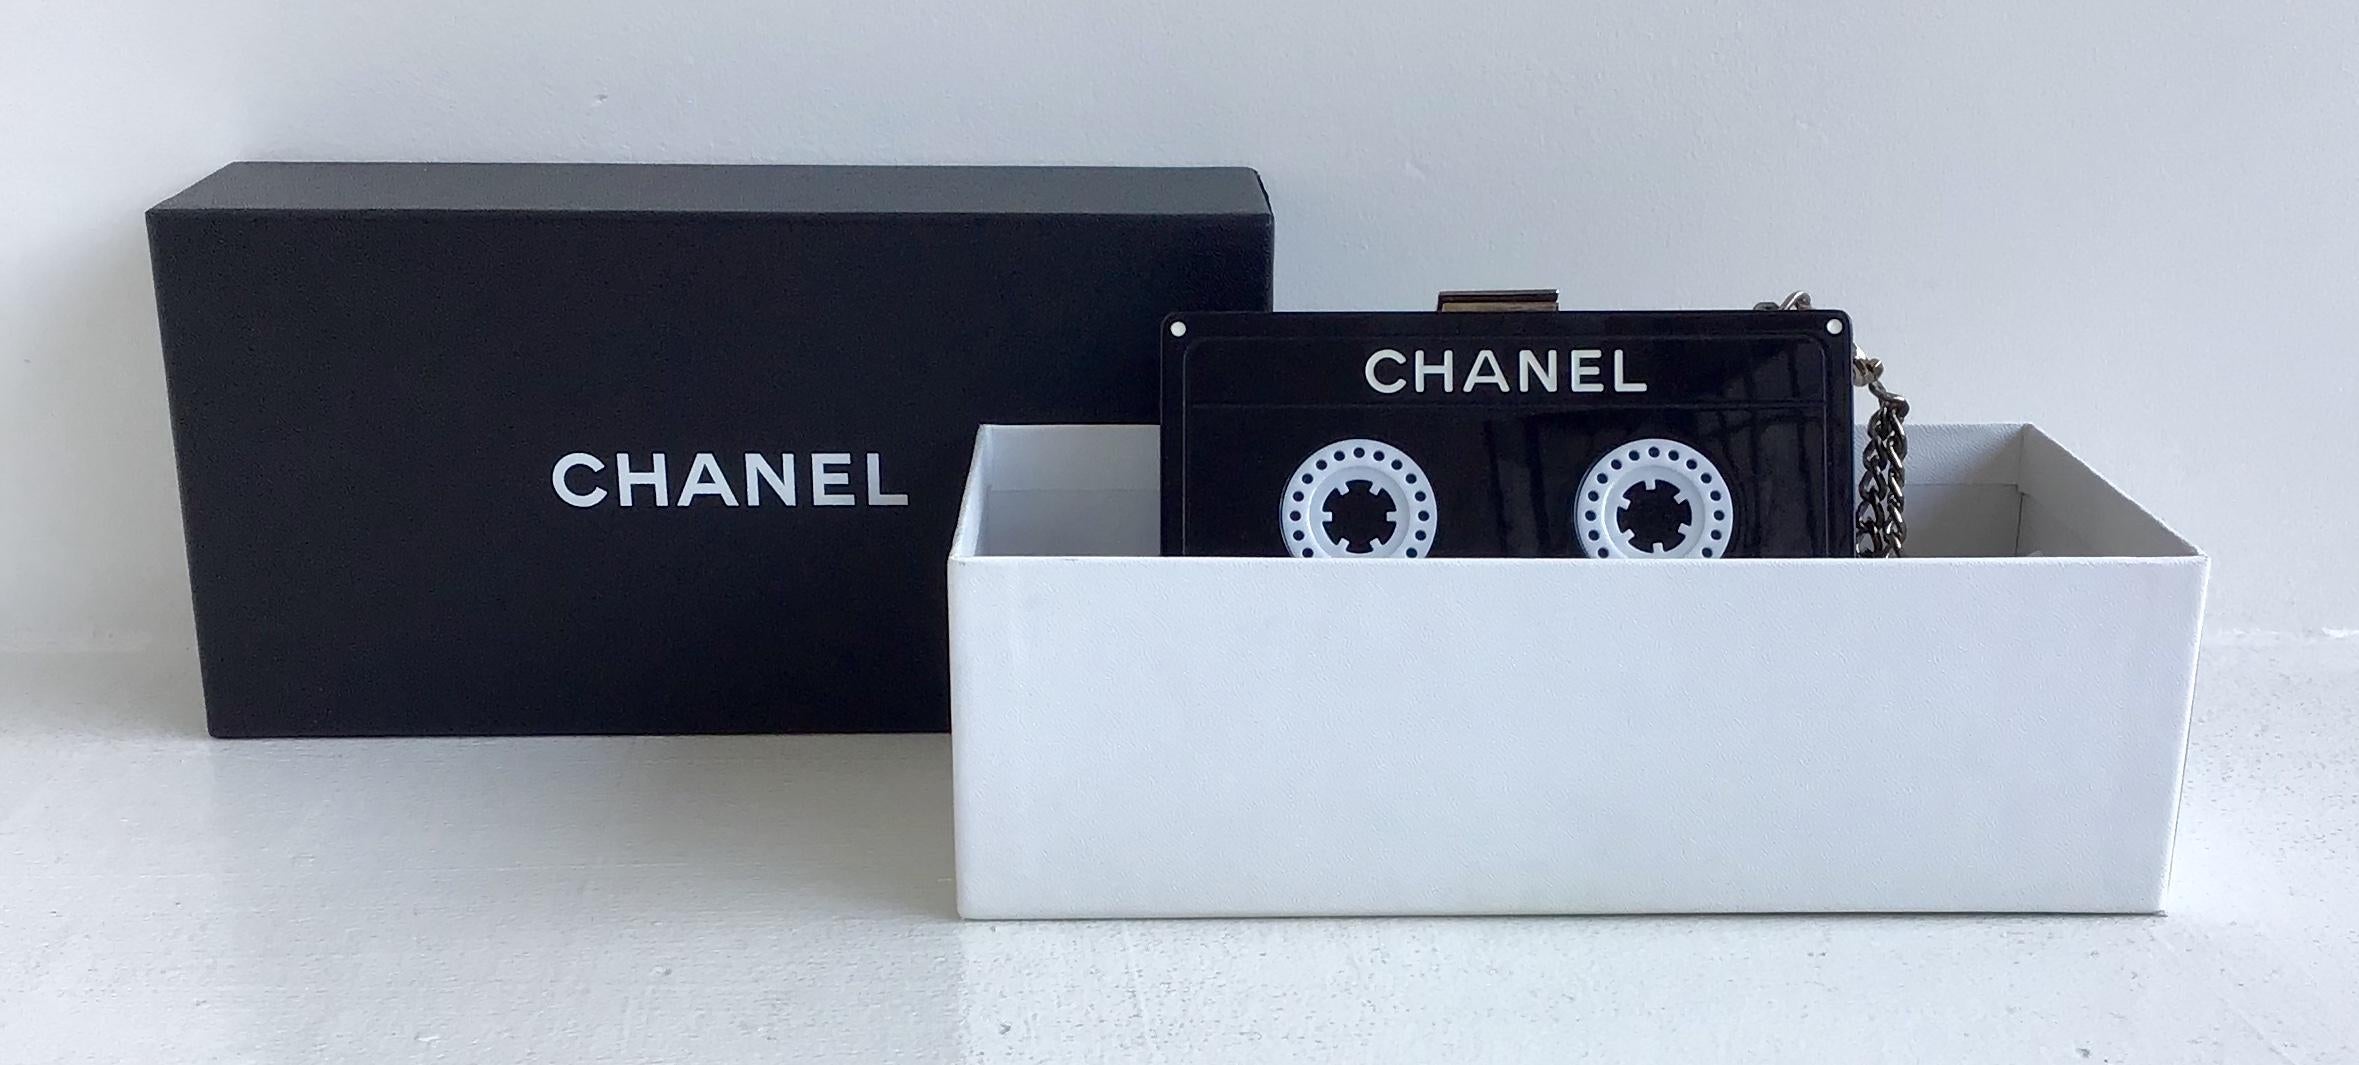 Chanel Black Cassette Tape Clutch
Bag is rare. Black and white lucite hand-sized clutch with chain wristlet attached. 